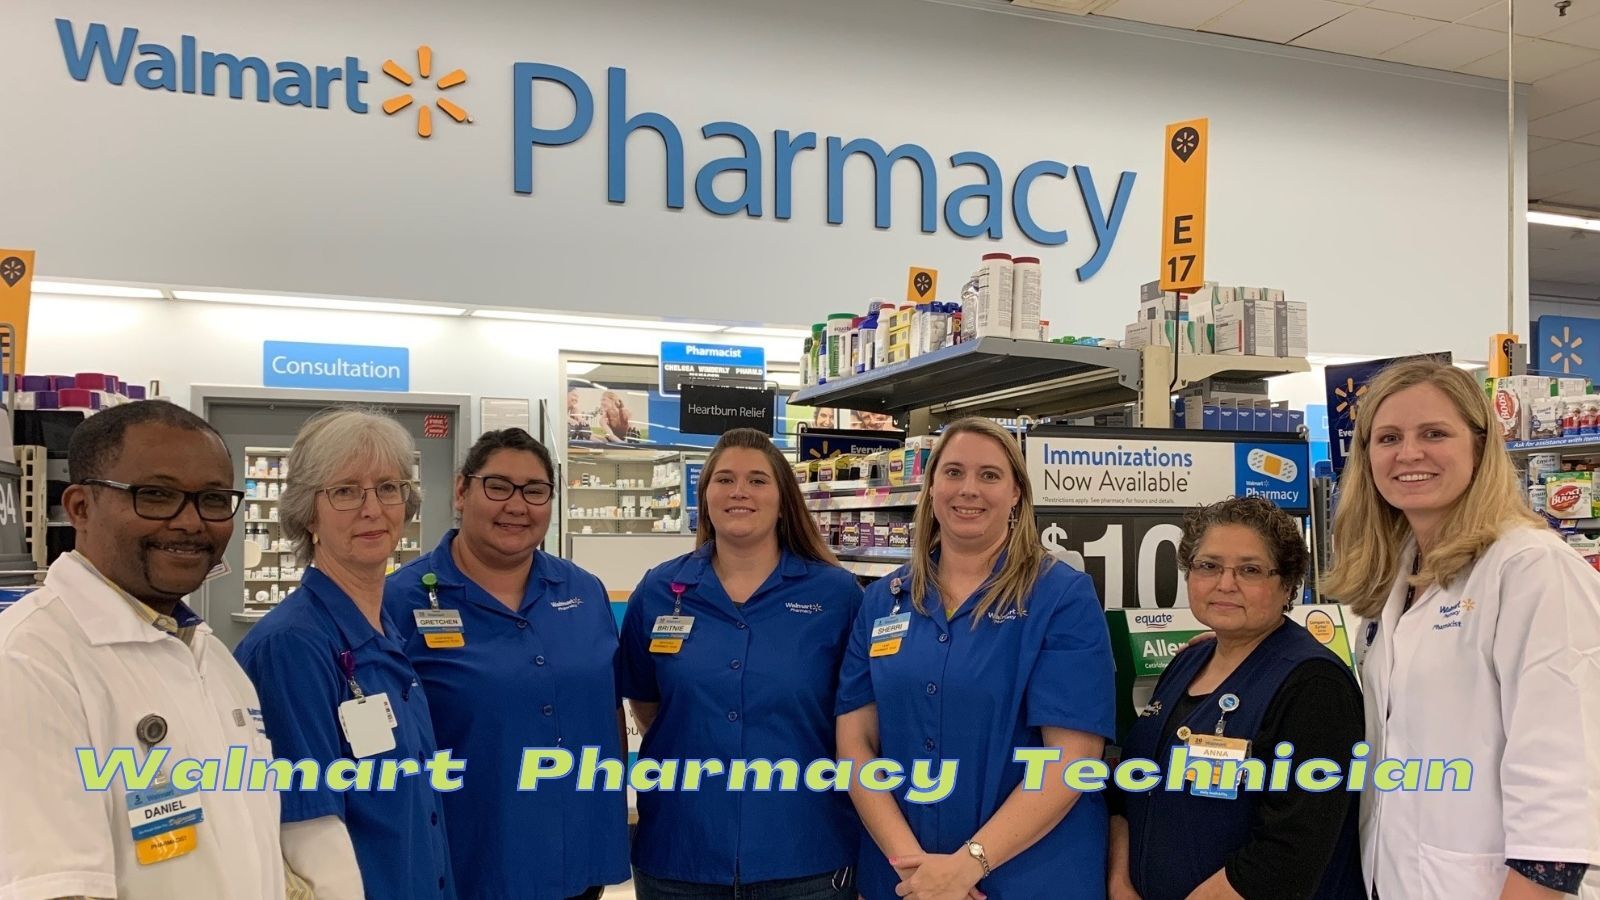 Walmart Pharmacy Technician: Everything You Need To Know in 2022!